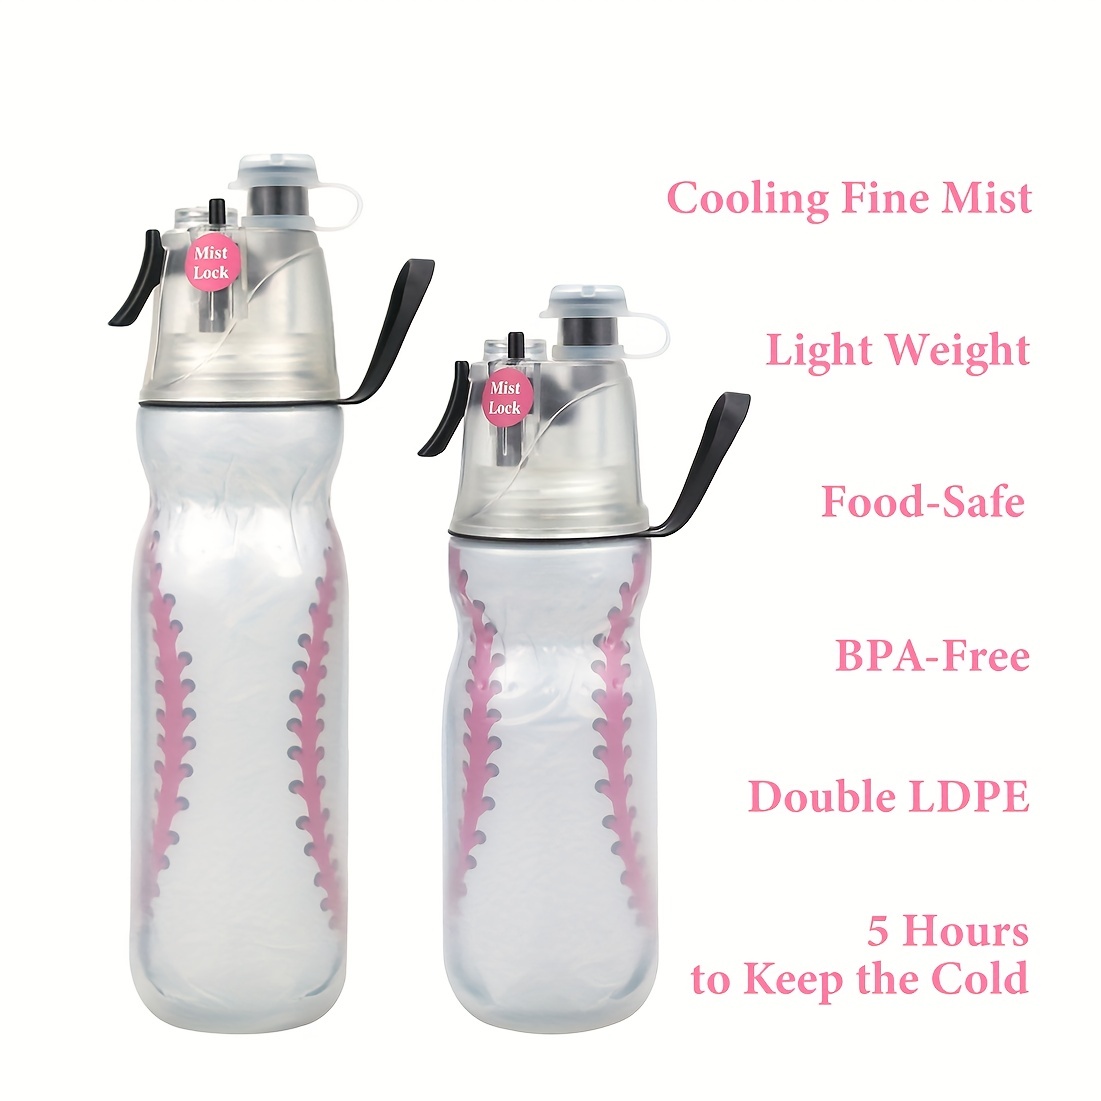 Misting Water Bottle, 2-in-1 Mist And Sip Function Sports Water